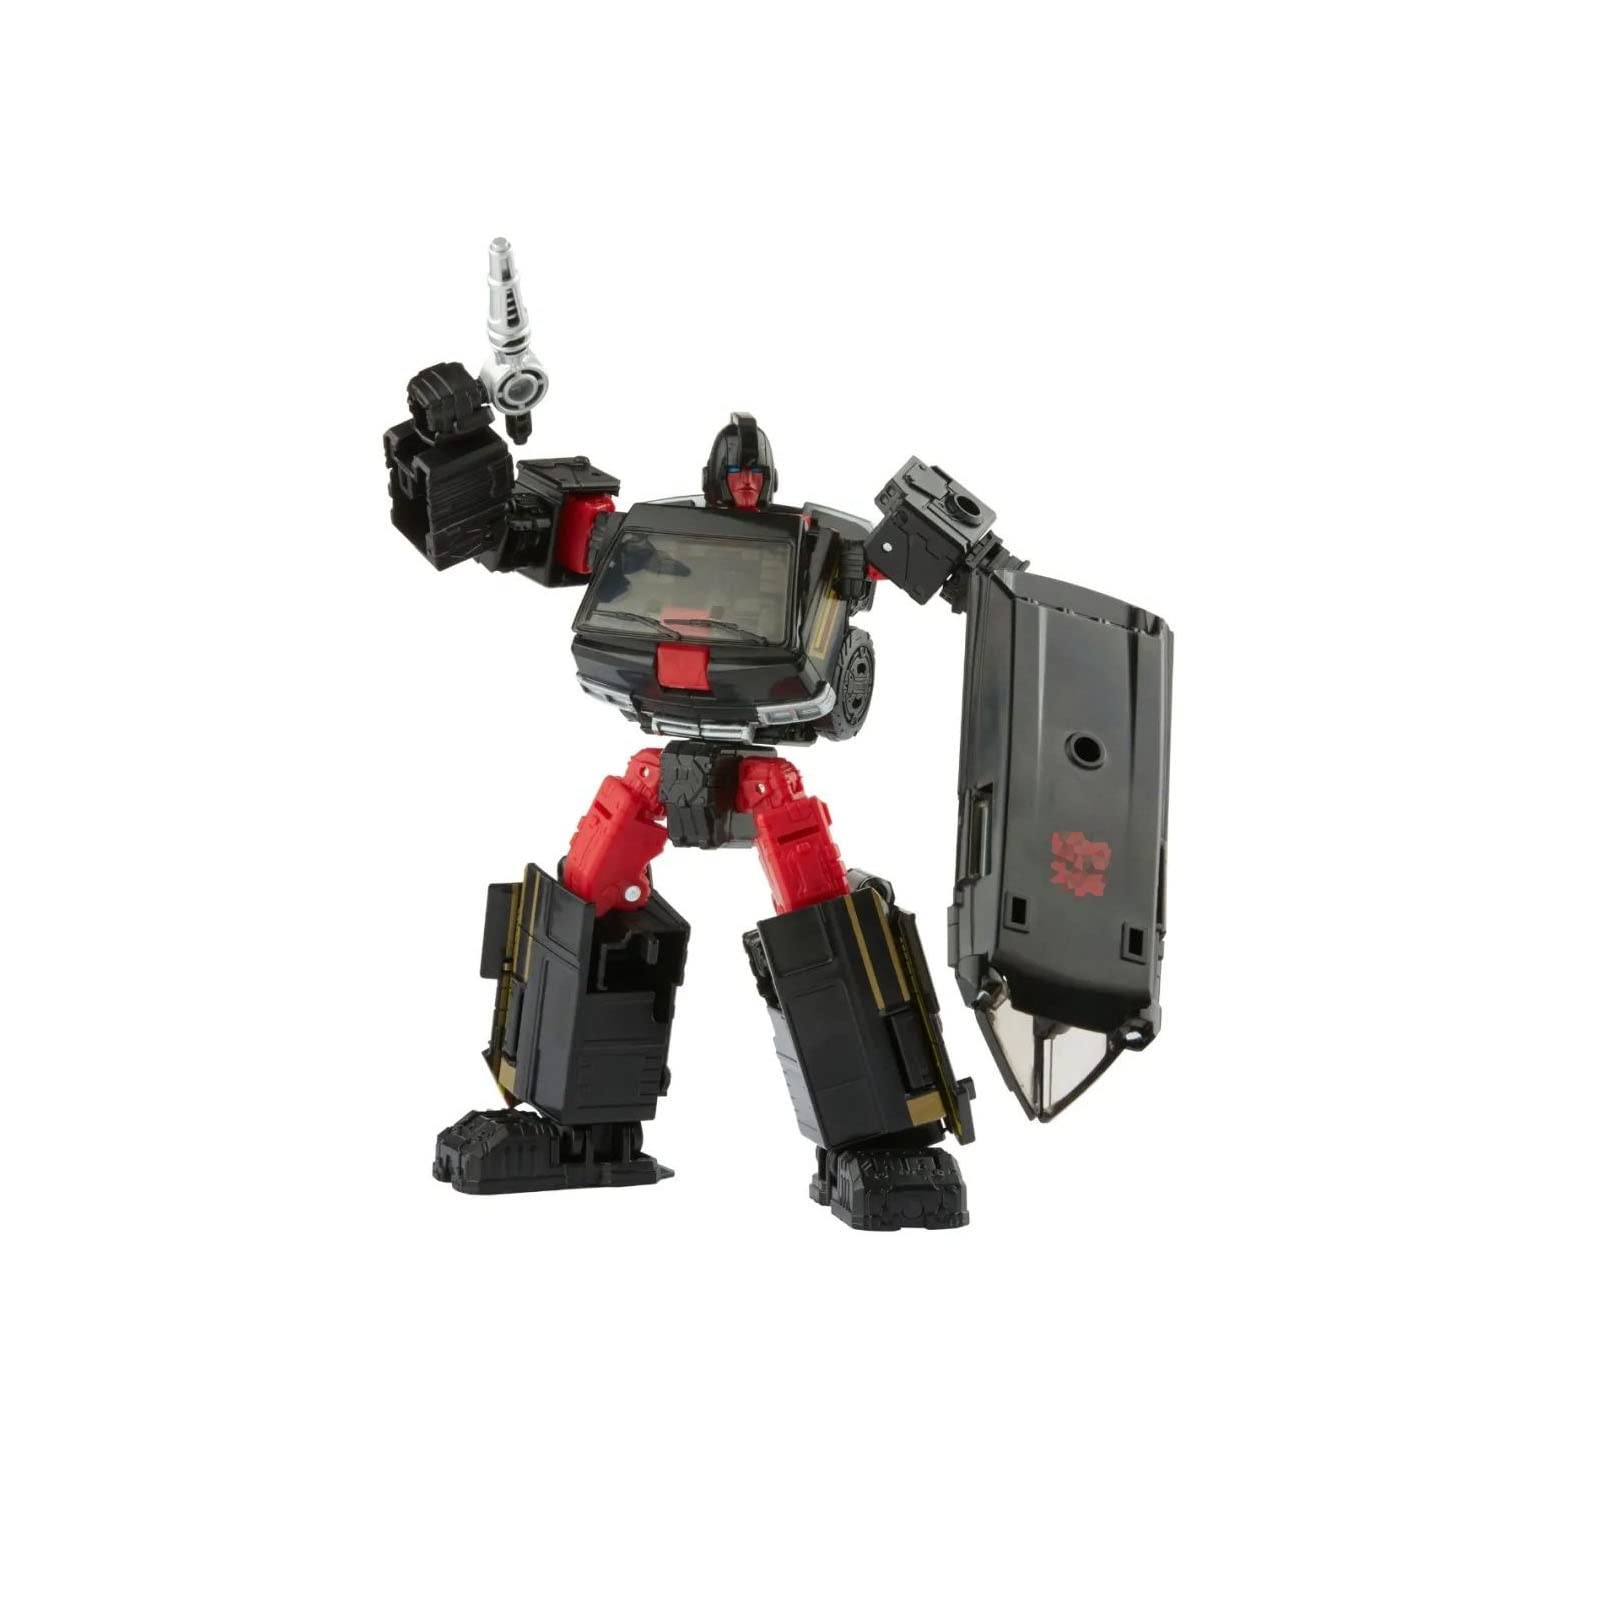 LCCLTOY Transformer Toys Generations Selects Deluxe DK-2 Guard Ironhide Action Figure 5.5-Inch